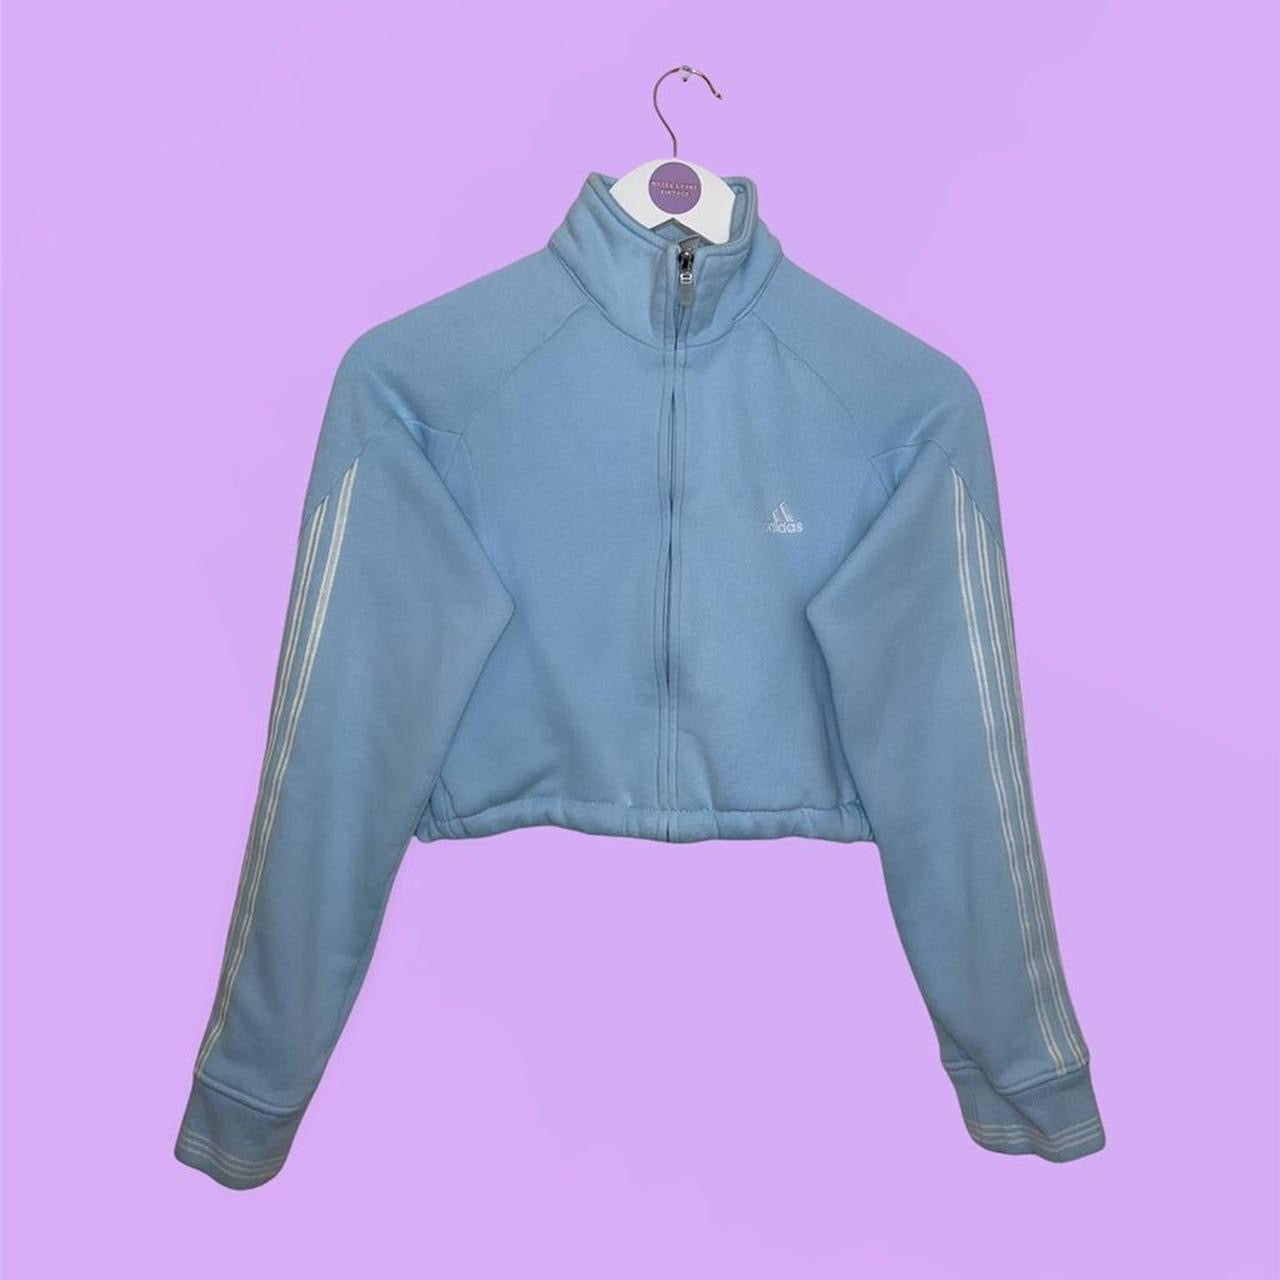 light blue zip up cropped sweatshirt with white small adidas logo on chest shown on a lilac background